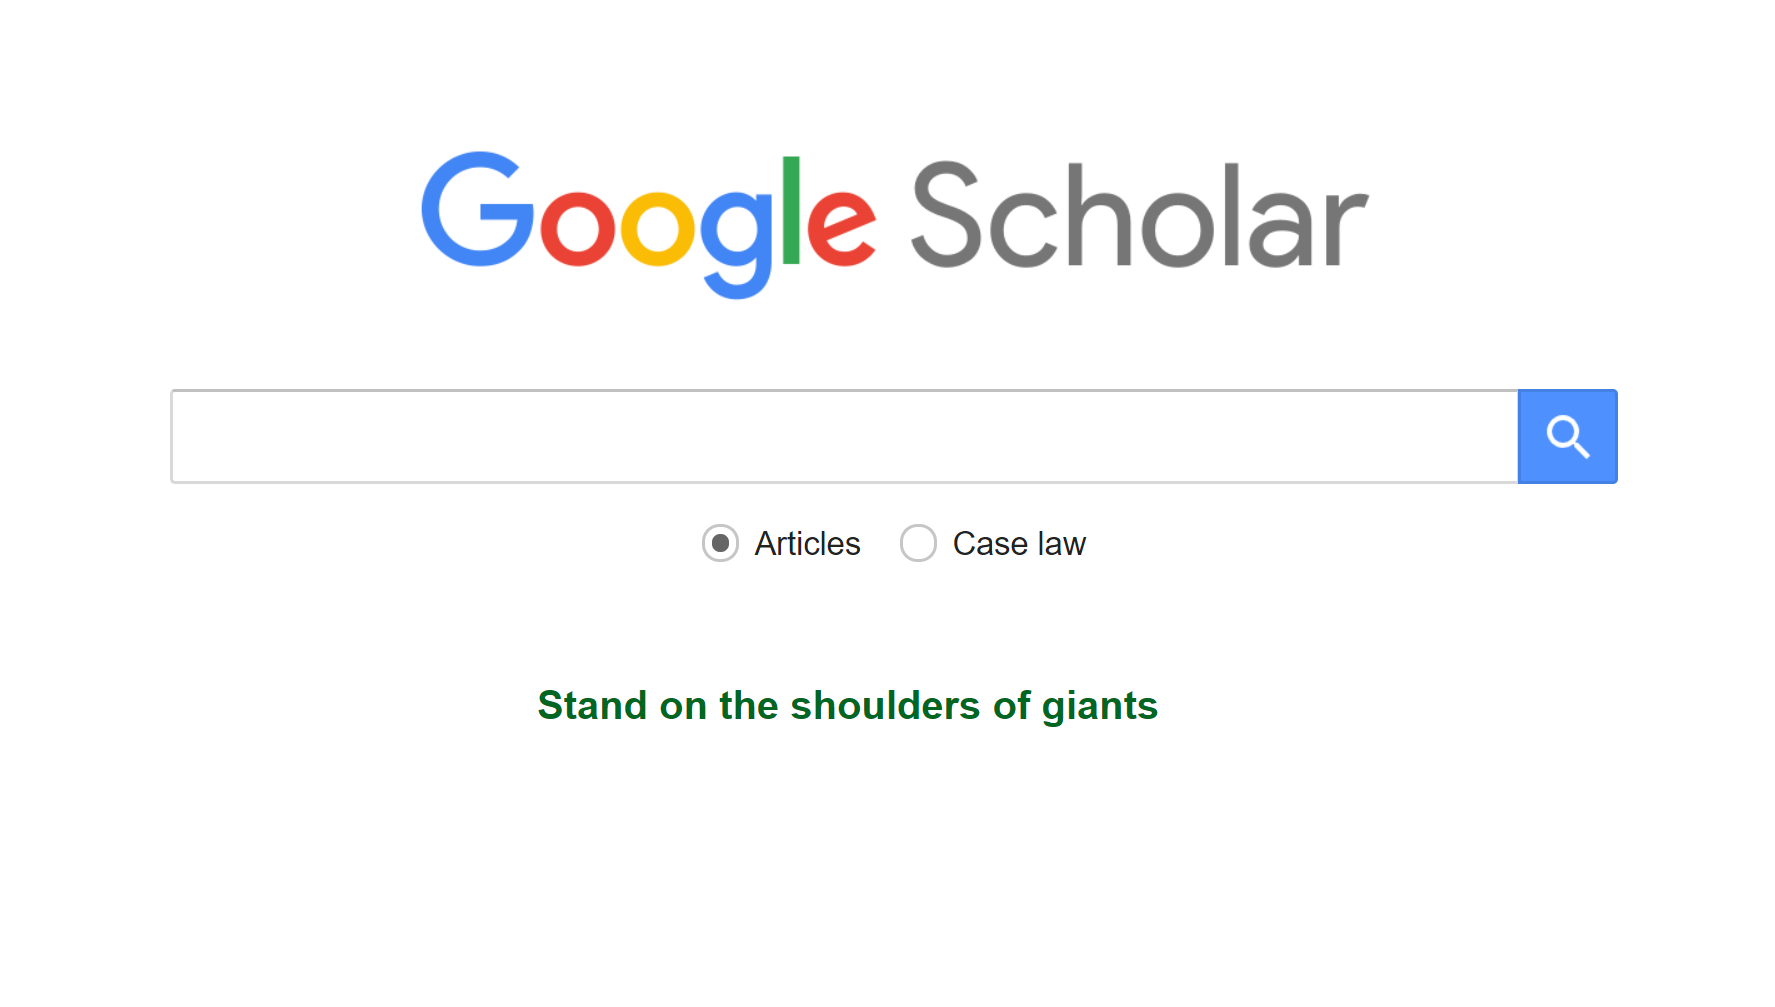 Google Scholar home page. Have you ever wondered what the blurb on the front of Google Scholar means? Who is standing on whose shoulders? Google and the Google logo are registered trademarks of Google LLC, used with permission.